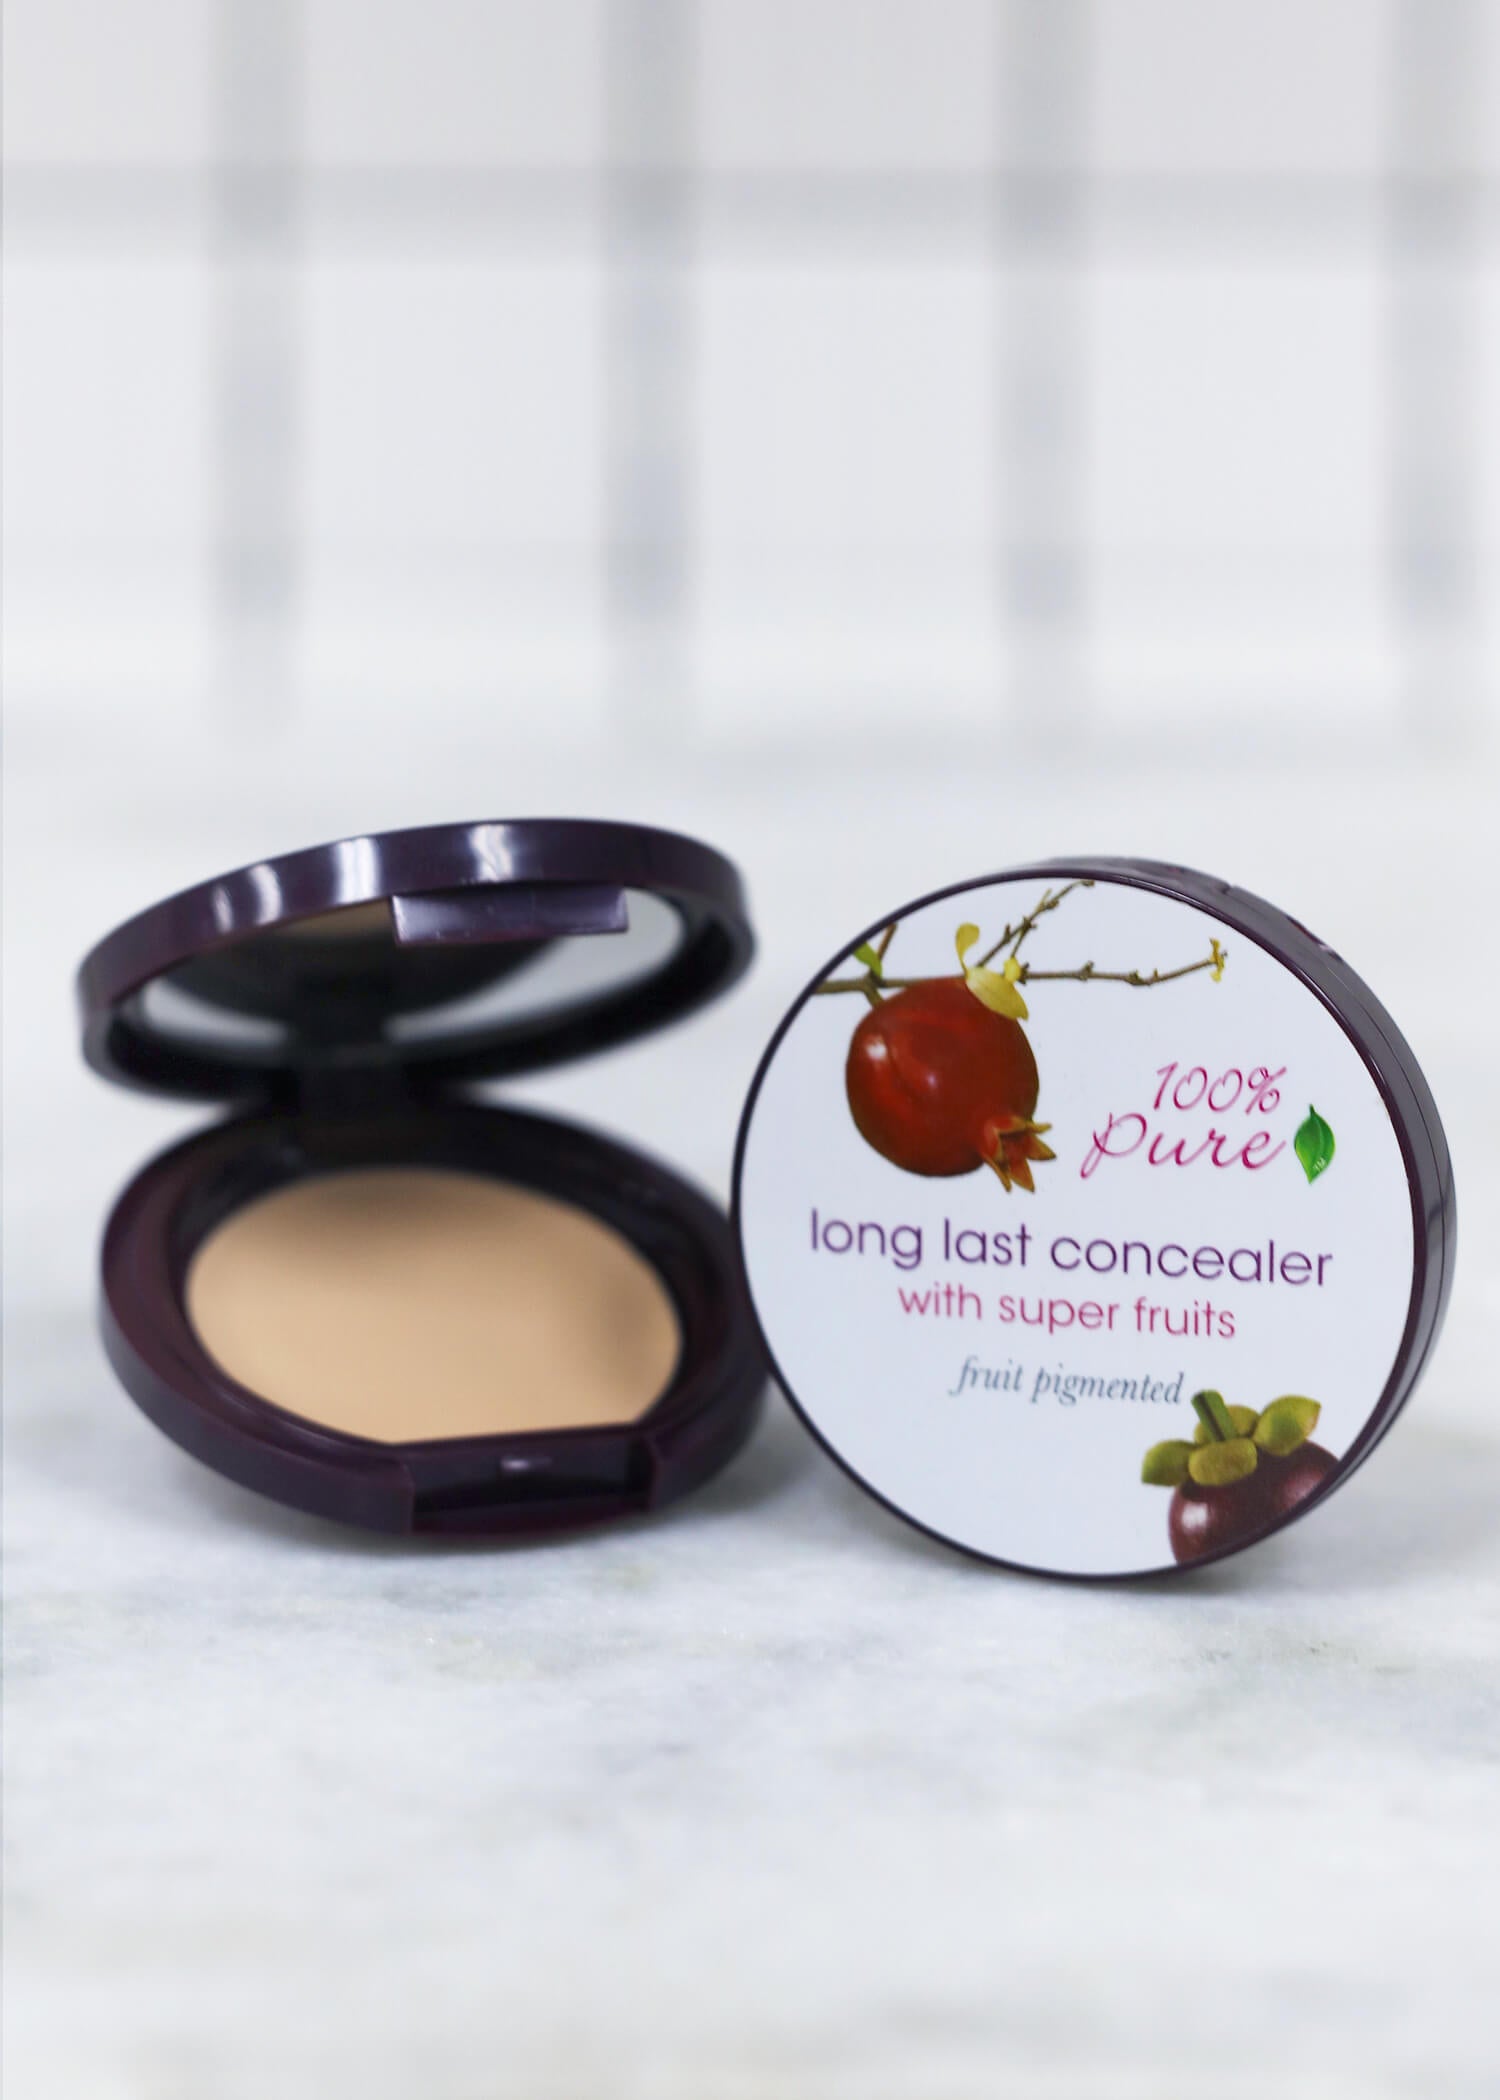 100% PURE Long Last Concealer with Super Fruits